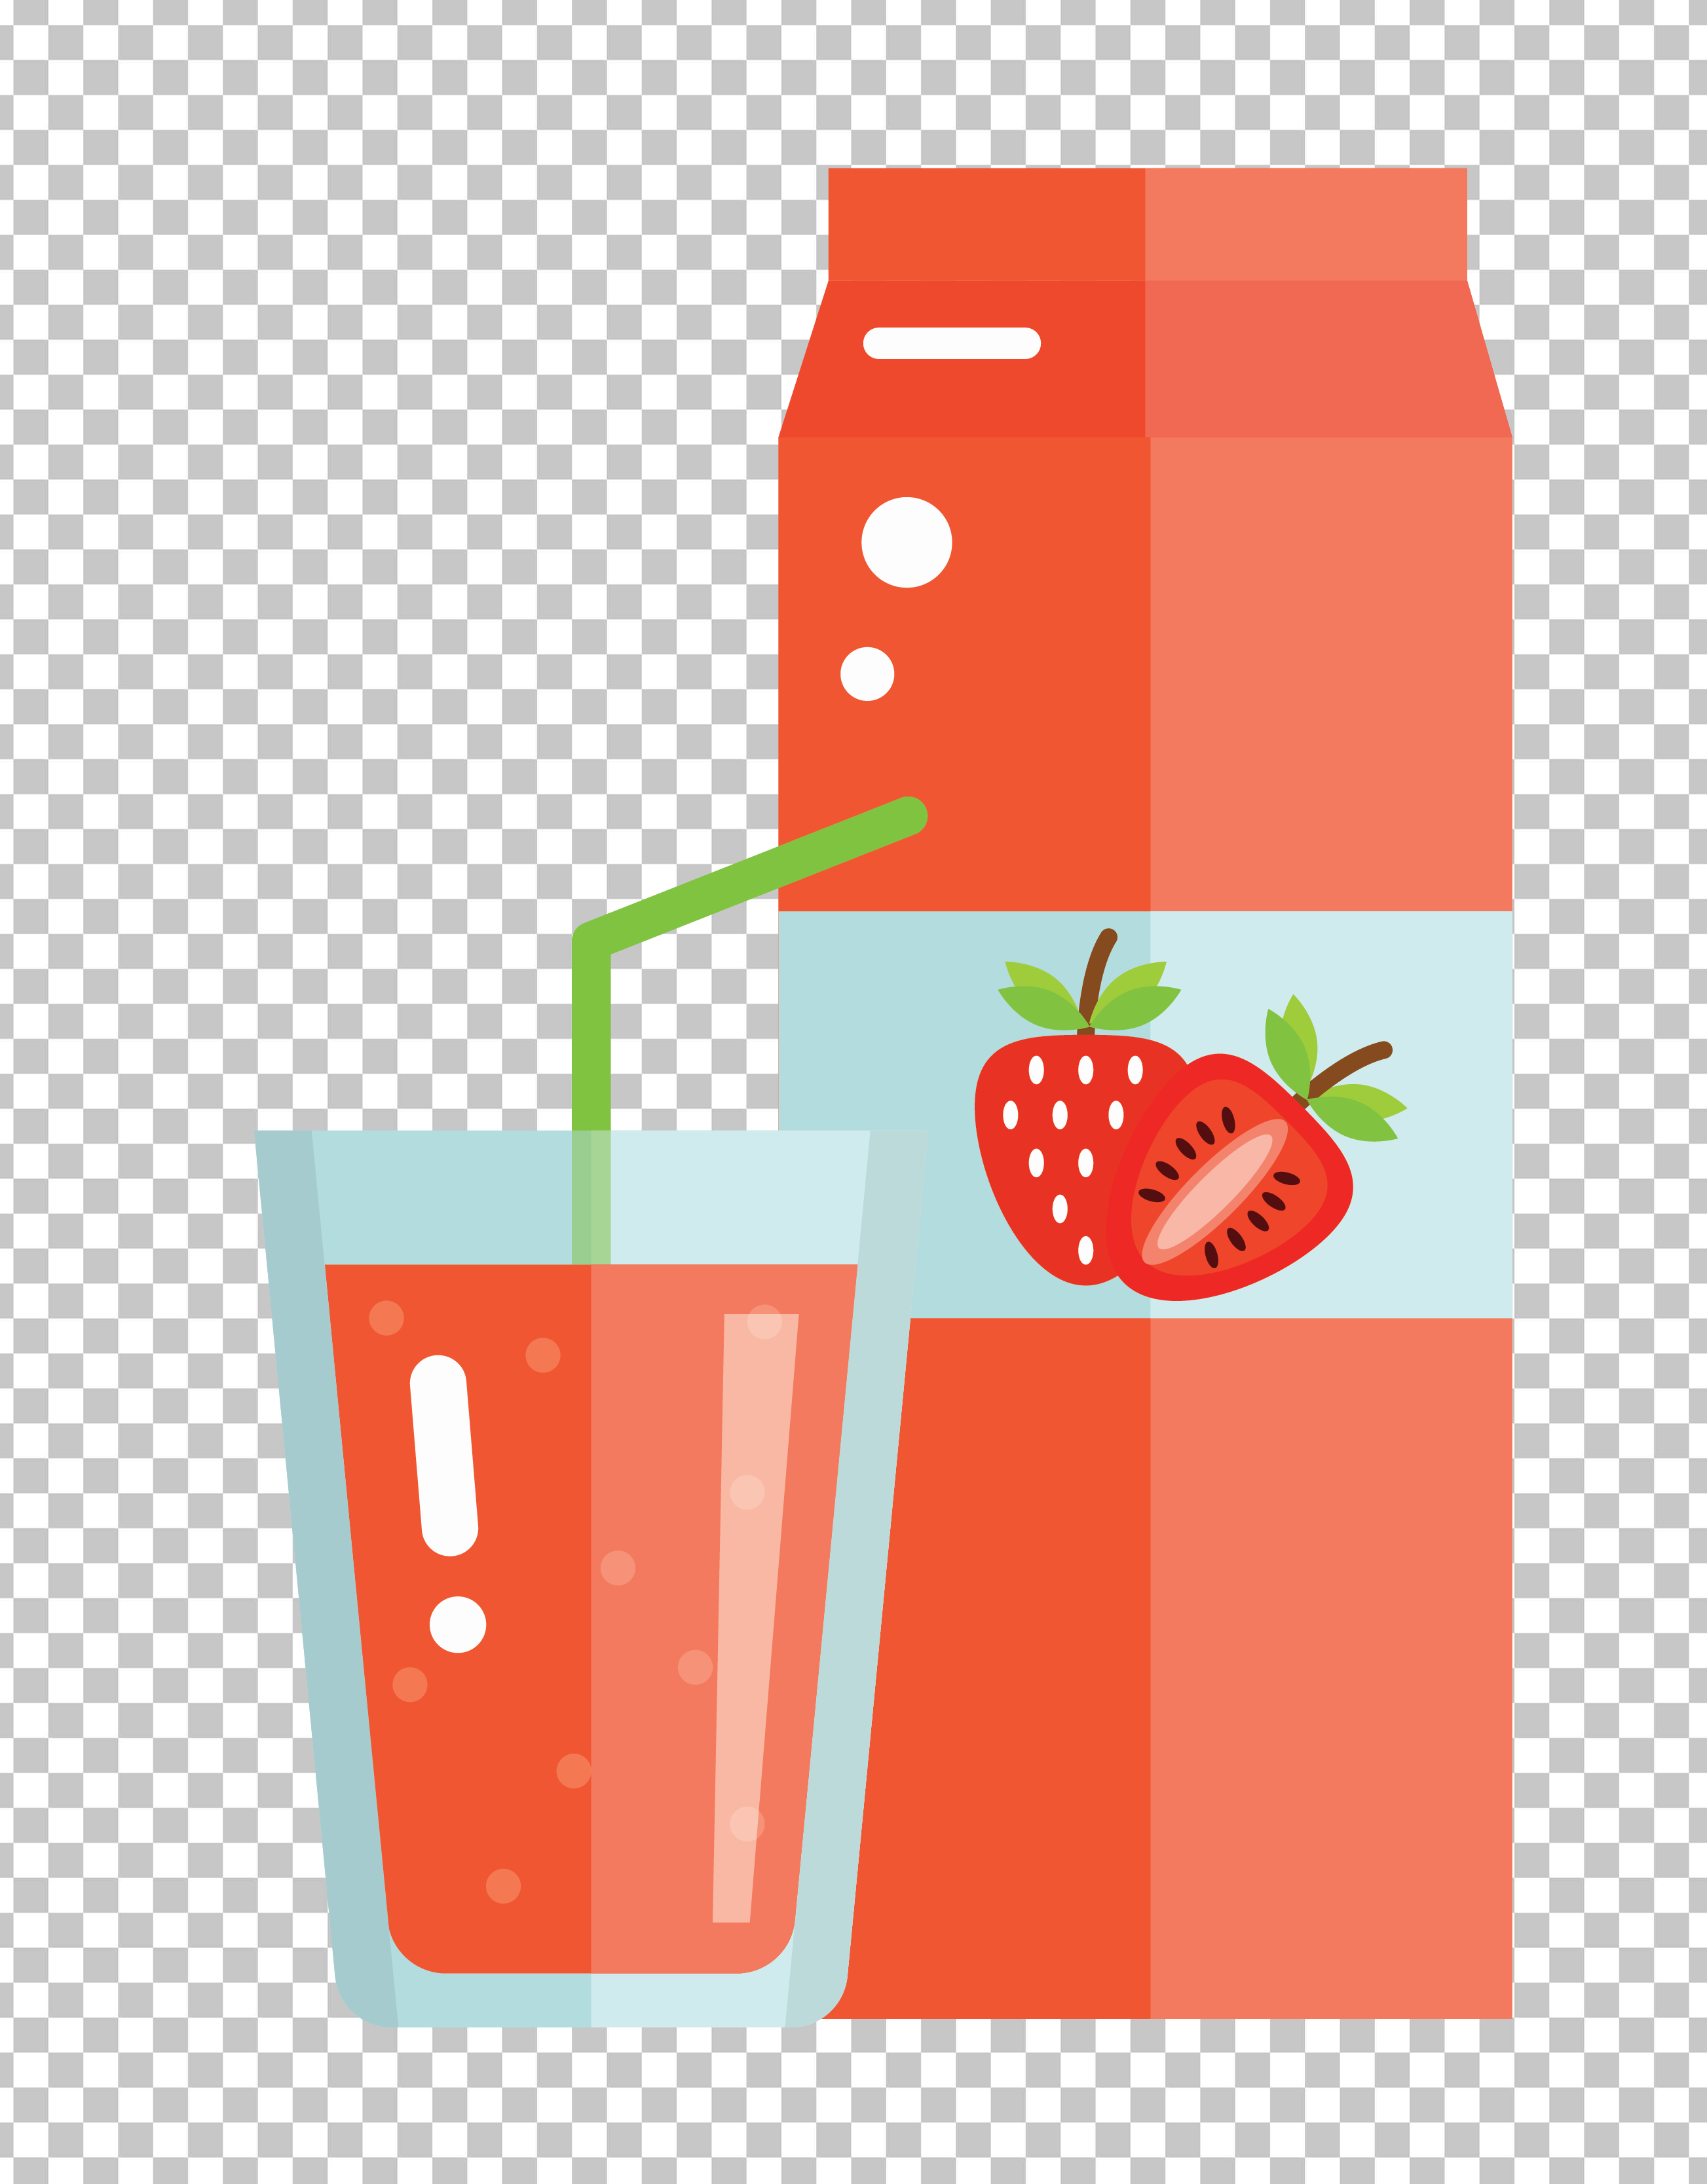 A carton of strawberry juice next to a glass of juice.